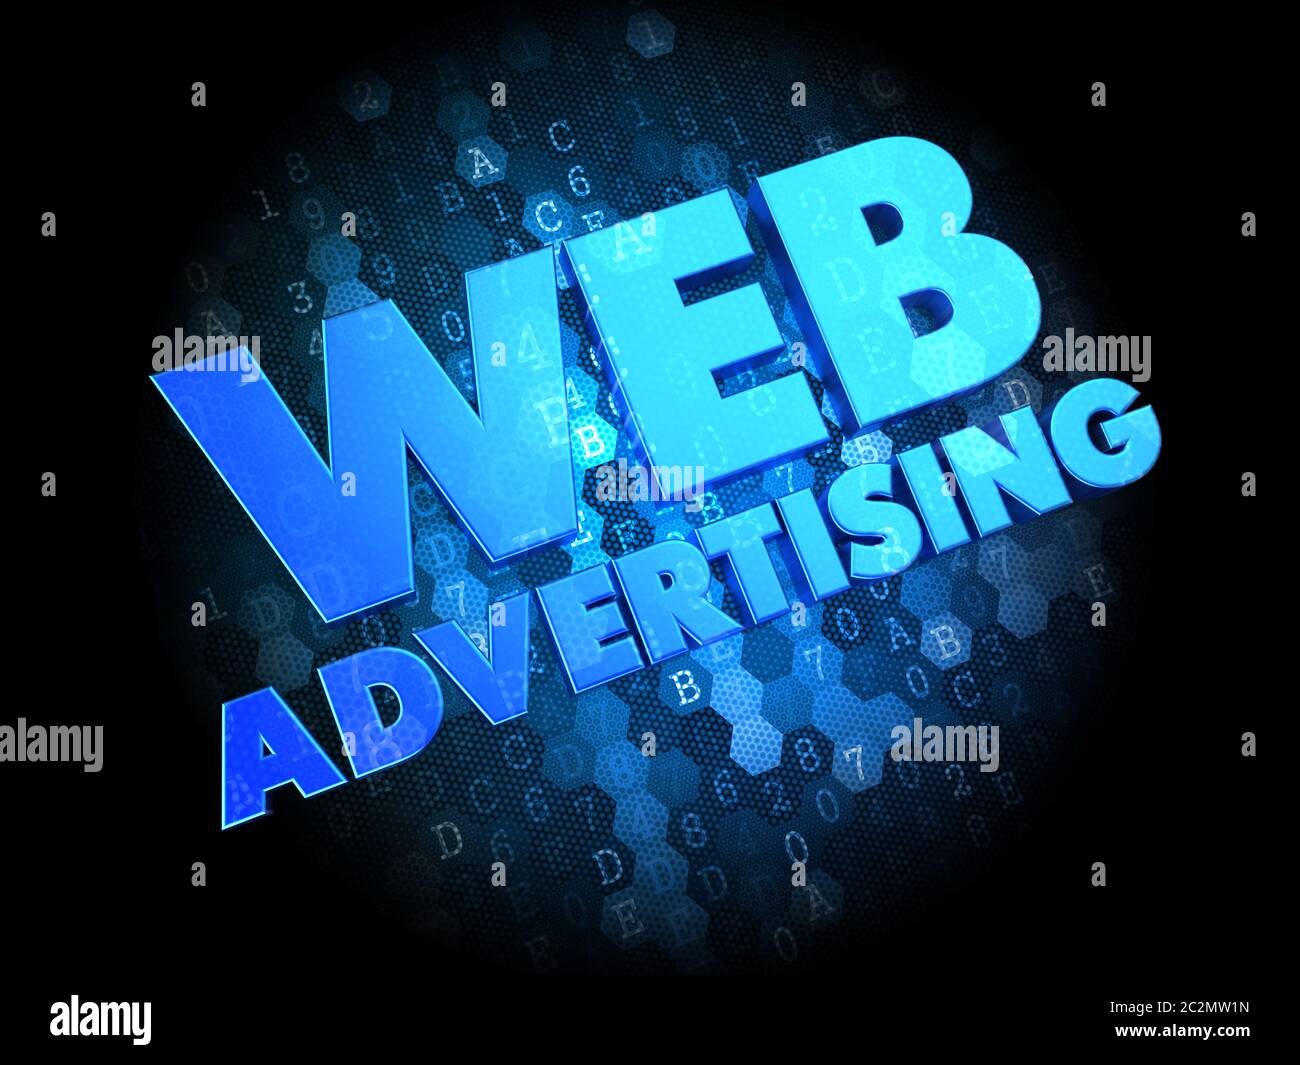 Web Advertising - Blue Color Text on Dark Digital Background. Stock Photo